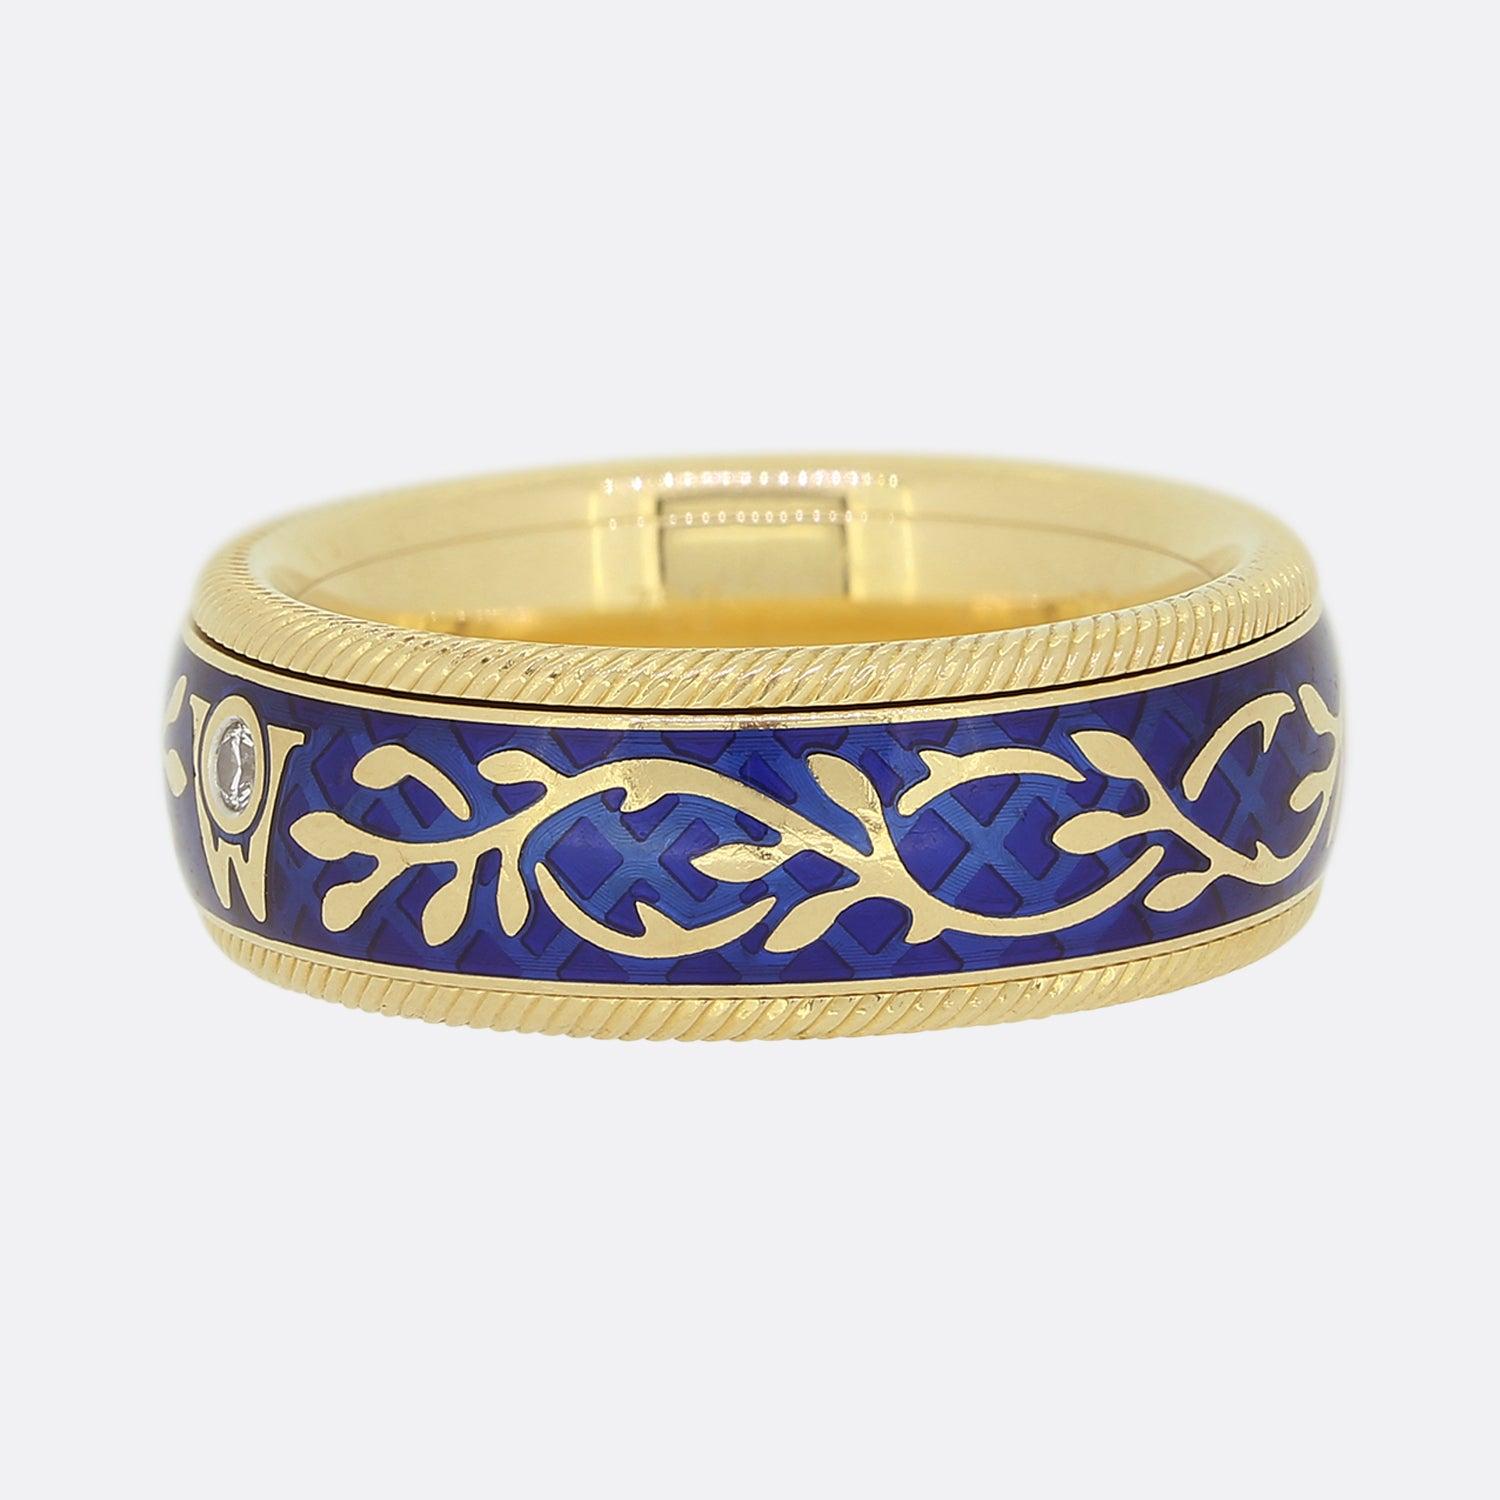 Here we have an 18ct yellow gold ring from the German jewellery designer, Wellendorff. The ring features two sections which allows the band to freely spin amidst an upper and lower roped bordering whilst the shank stays still and comfortable on the